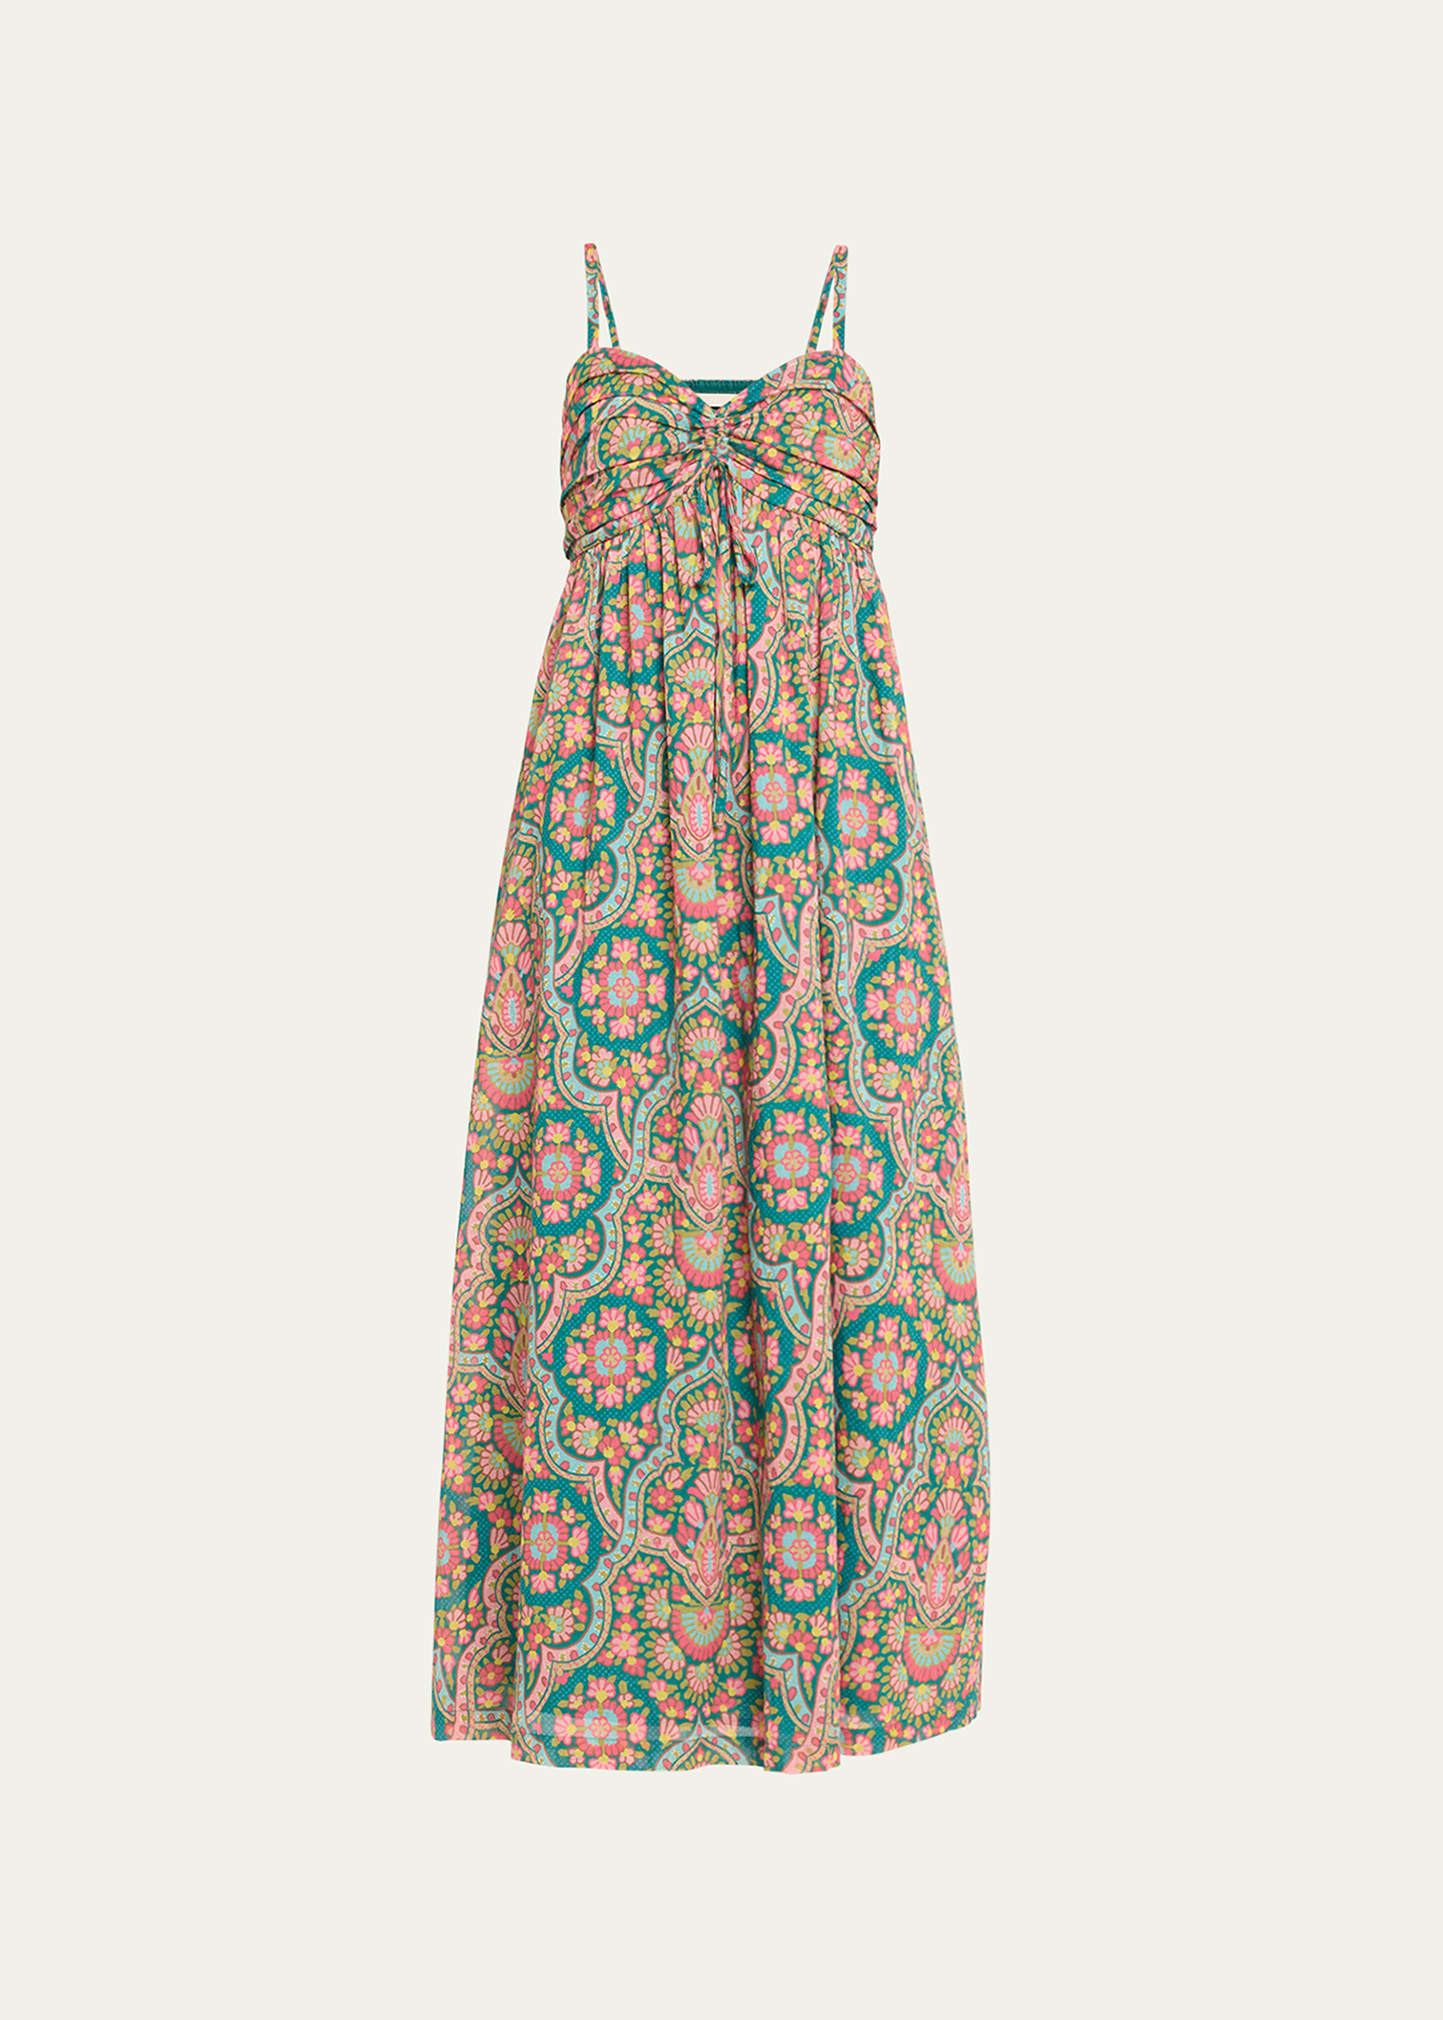 The Looking Glass Empire Maxi Dress